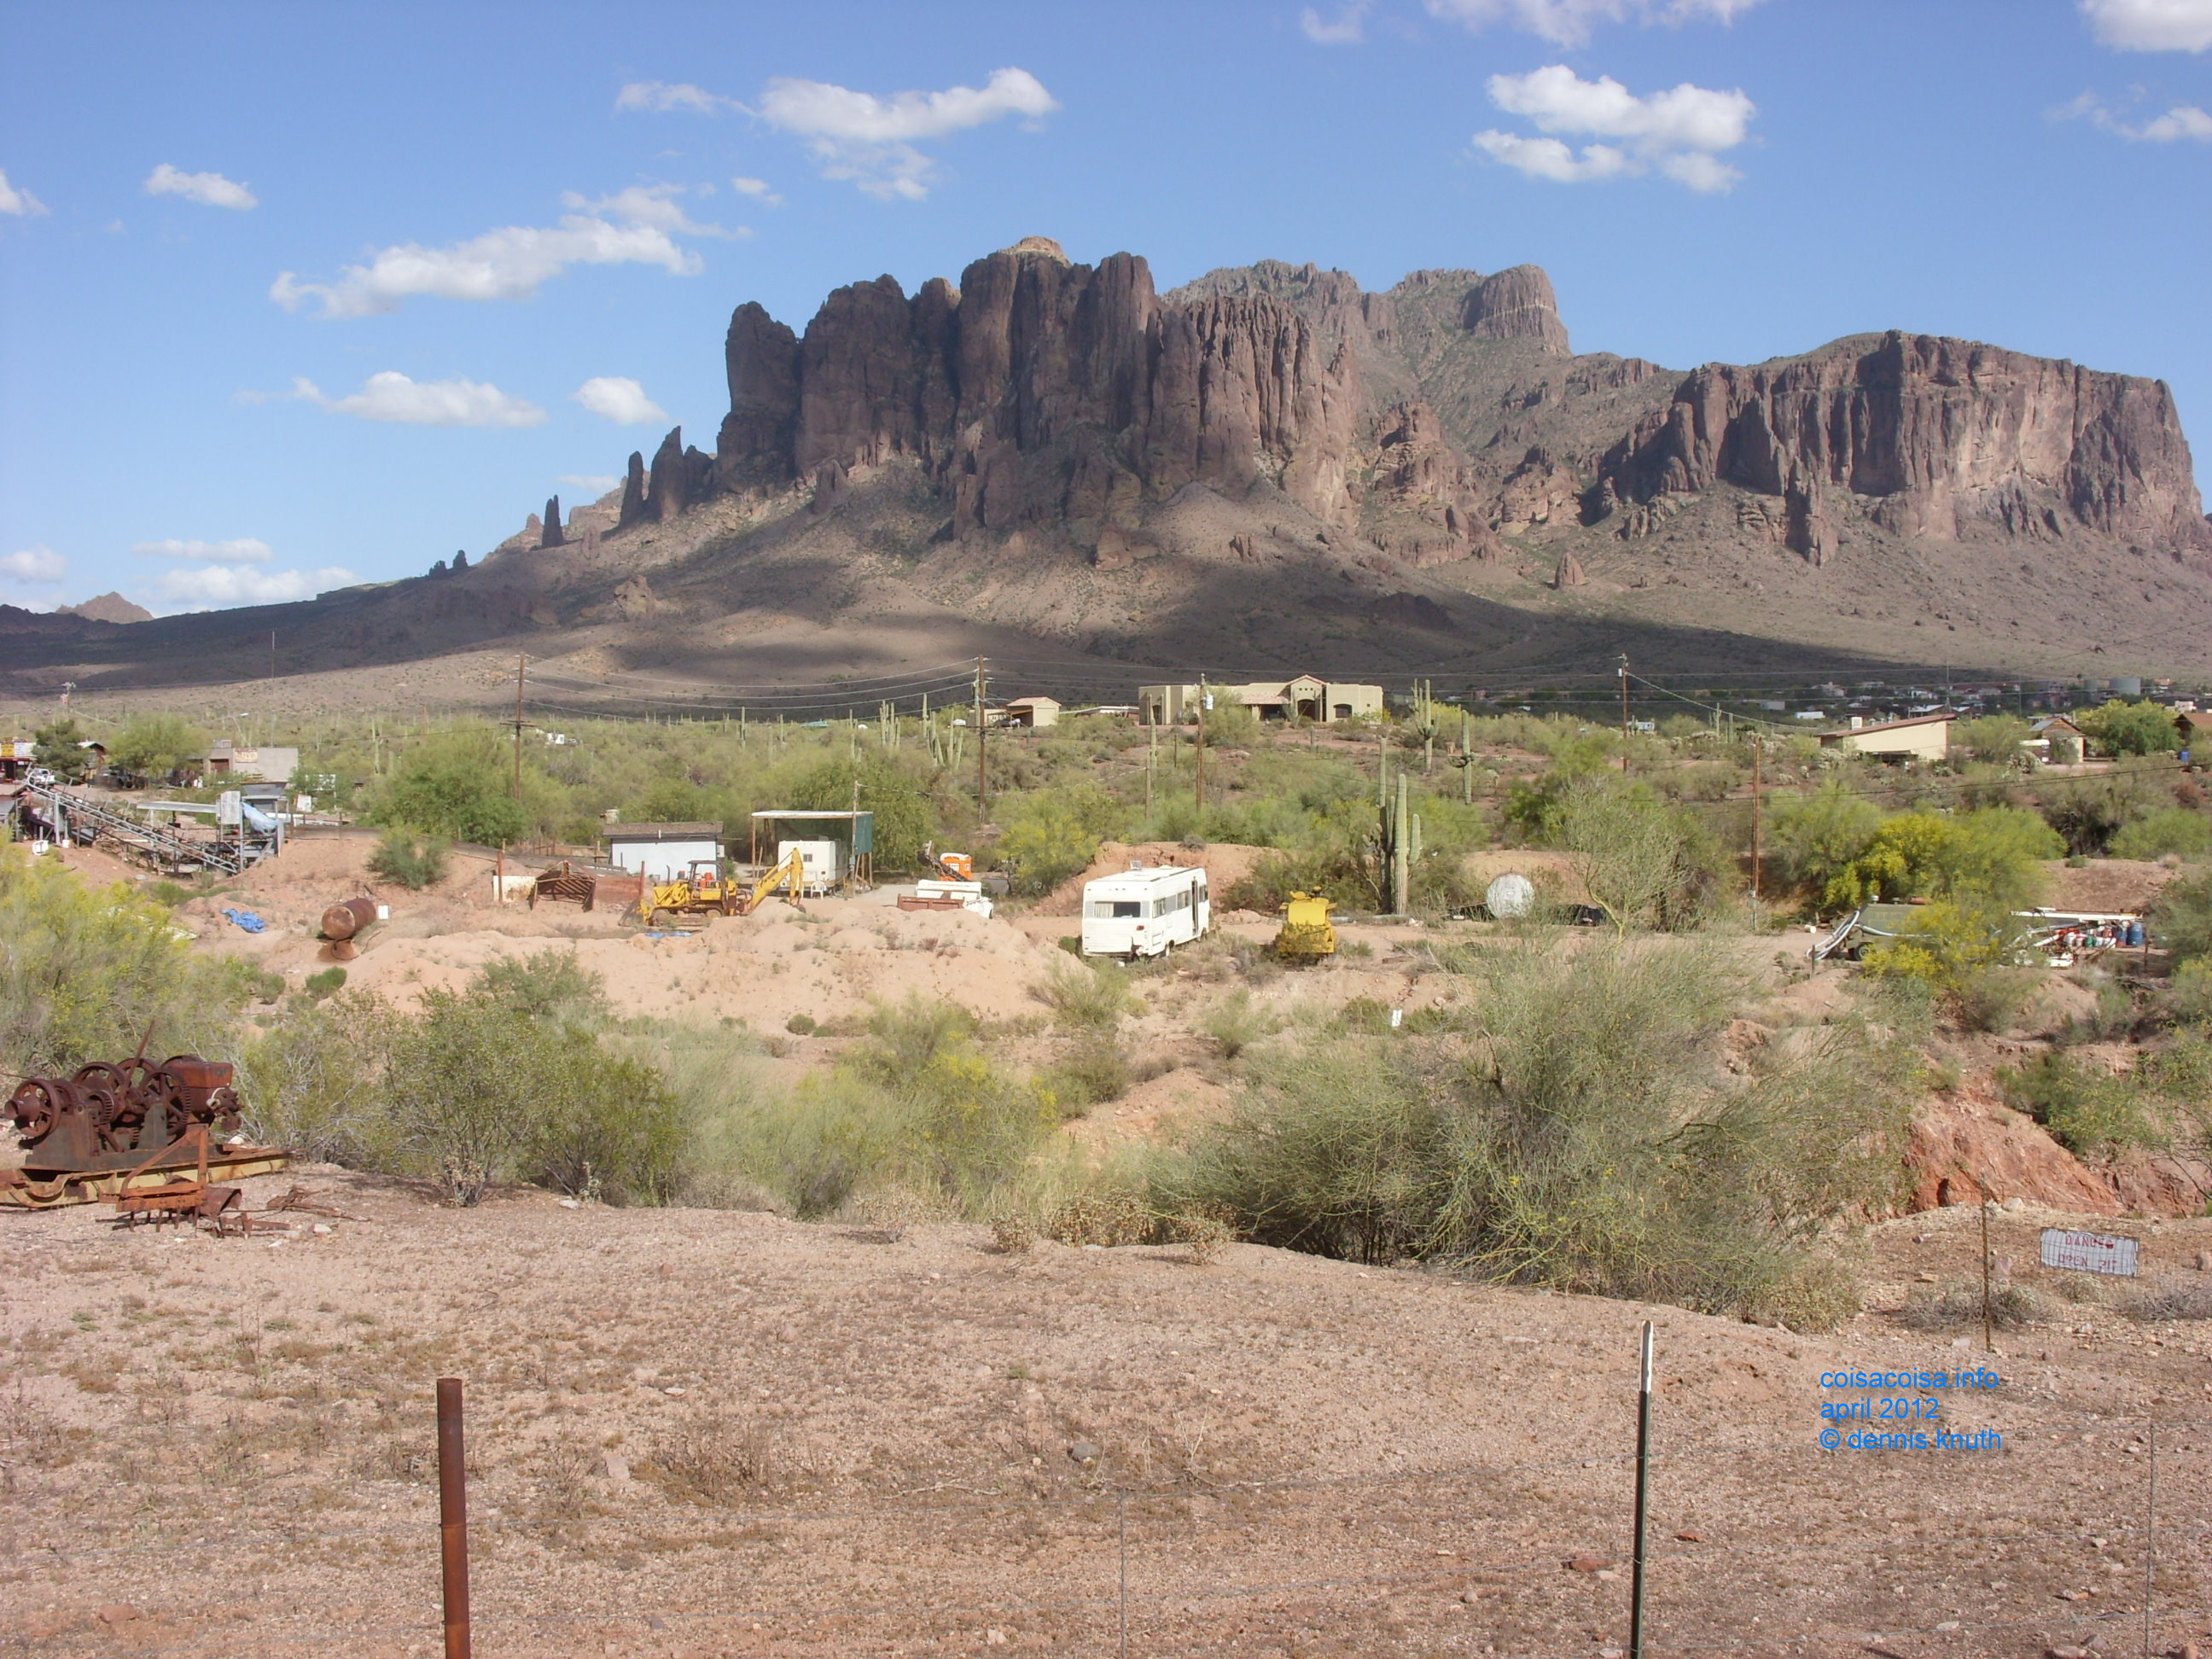 2012_04_26_e_apache_junction_ghost_town_0014.jpg (large)